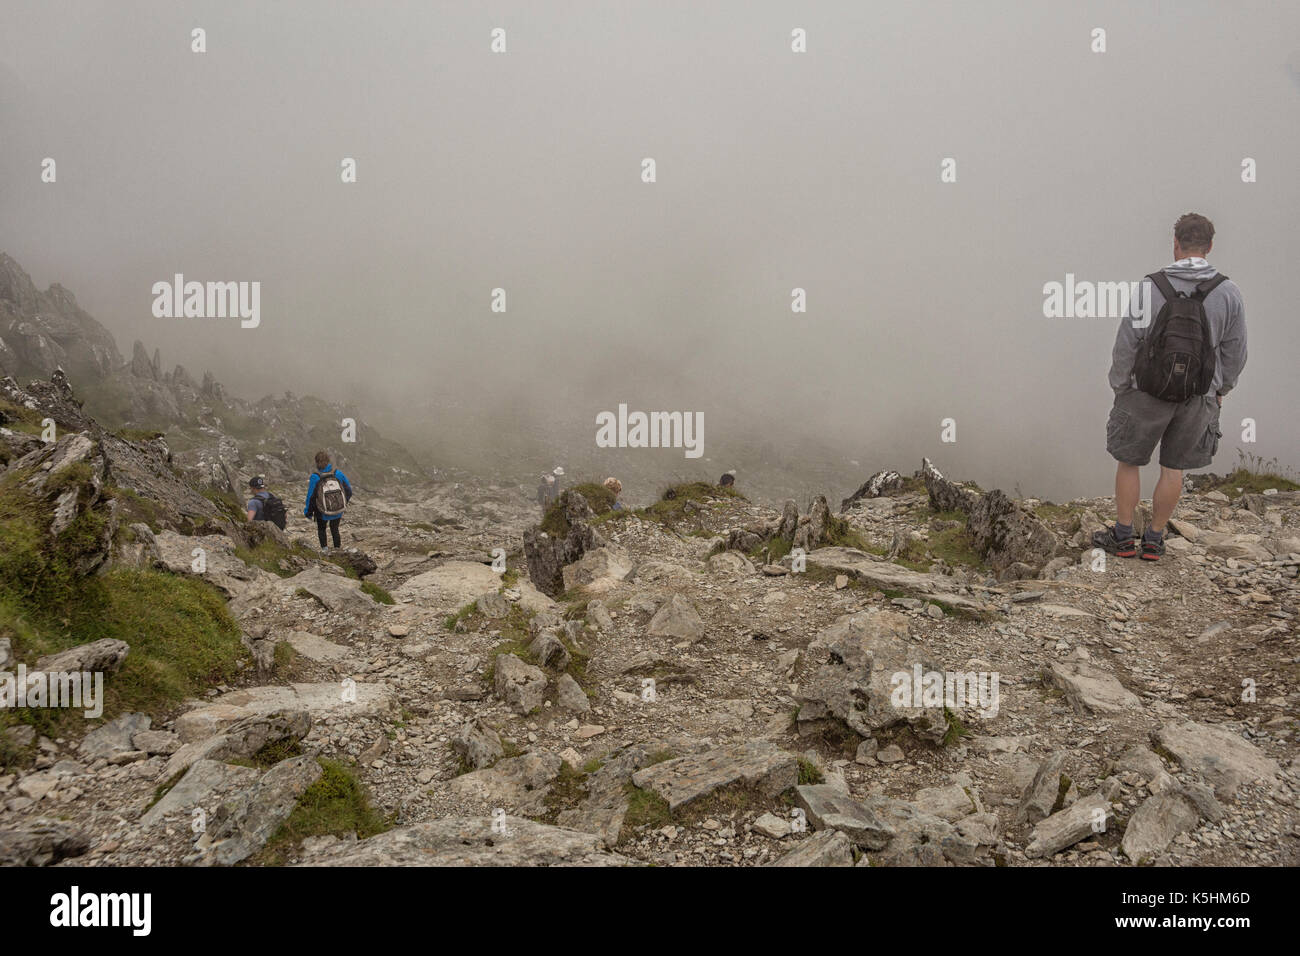 Hikers descending Snowdon mountain in Wales Stock Photo